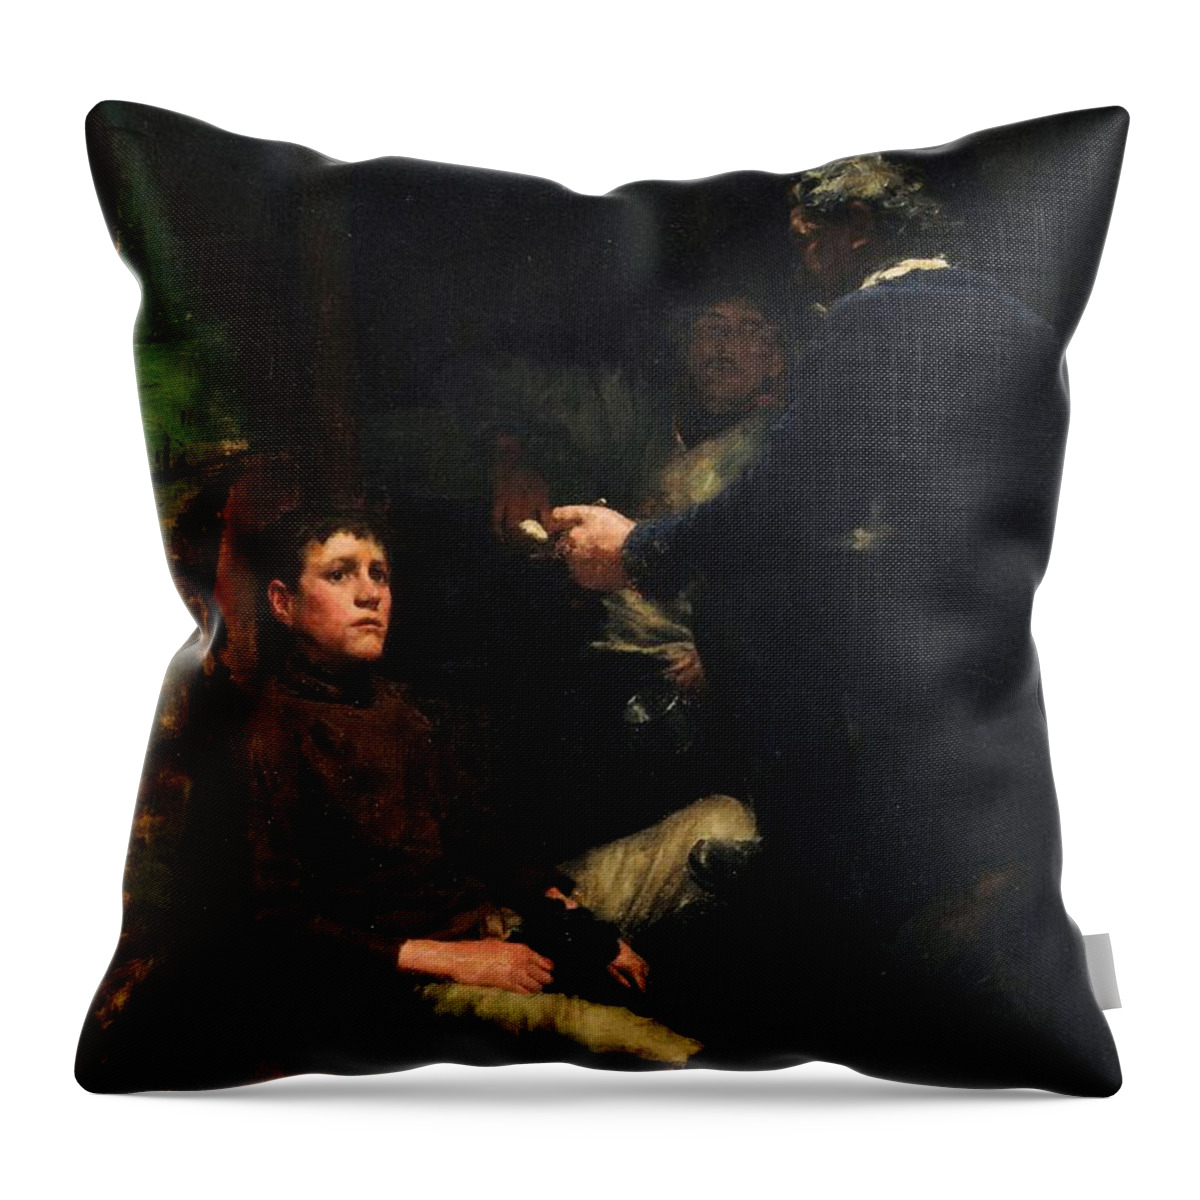 Henry Throw Pillow featuring the painting A Sailors Yarn by Henry Scott Tuke